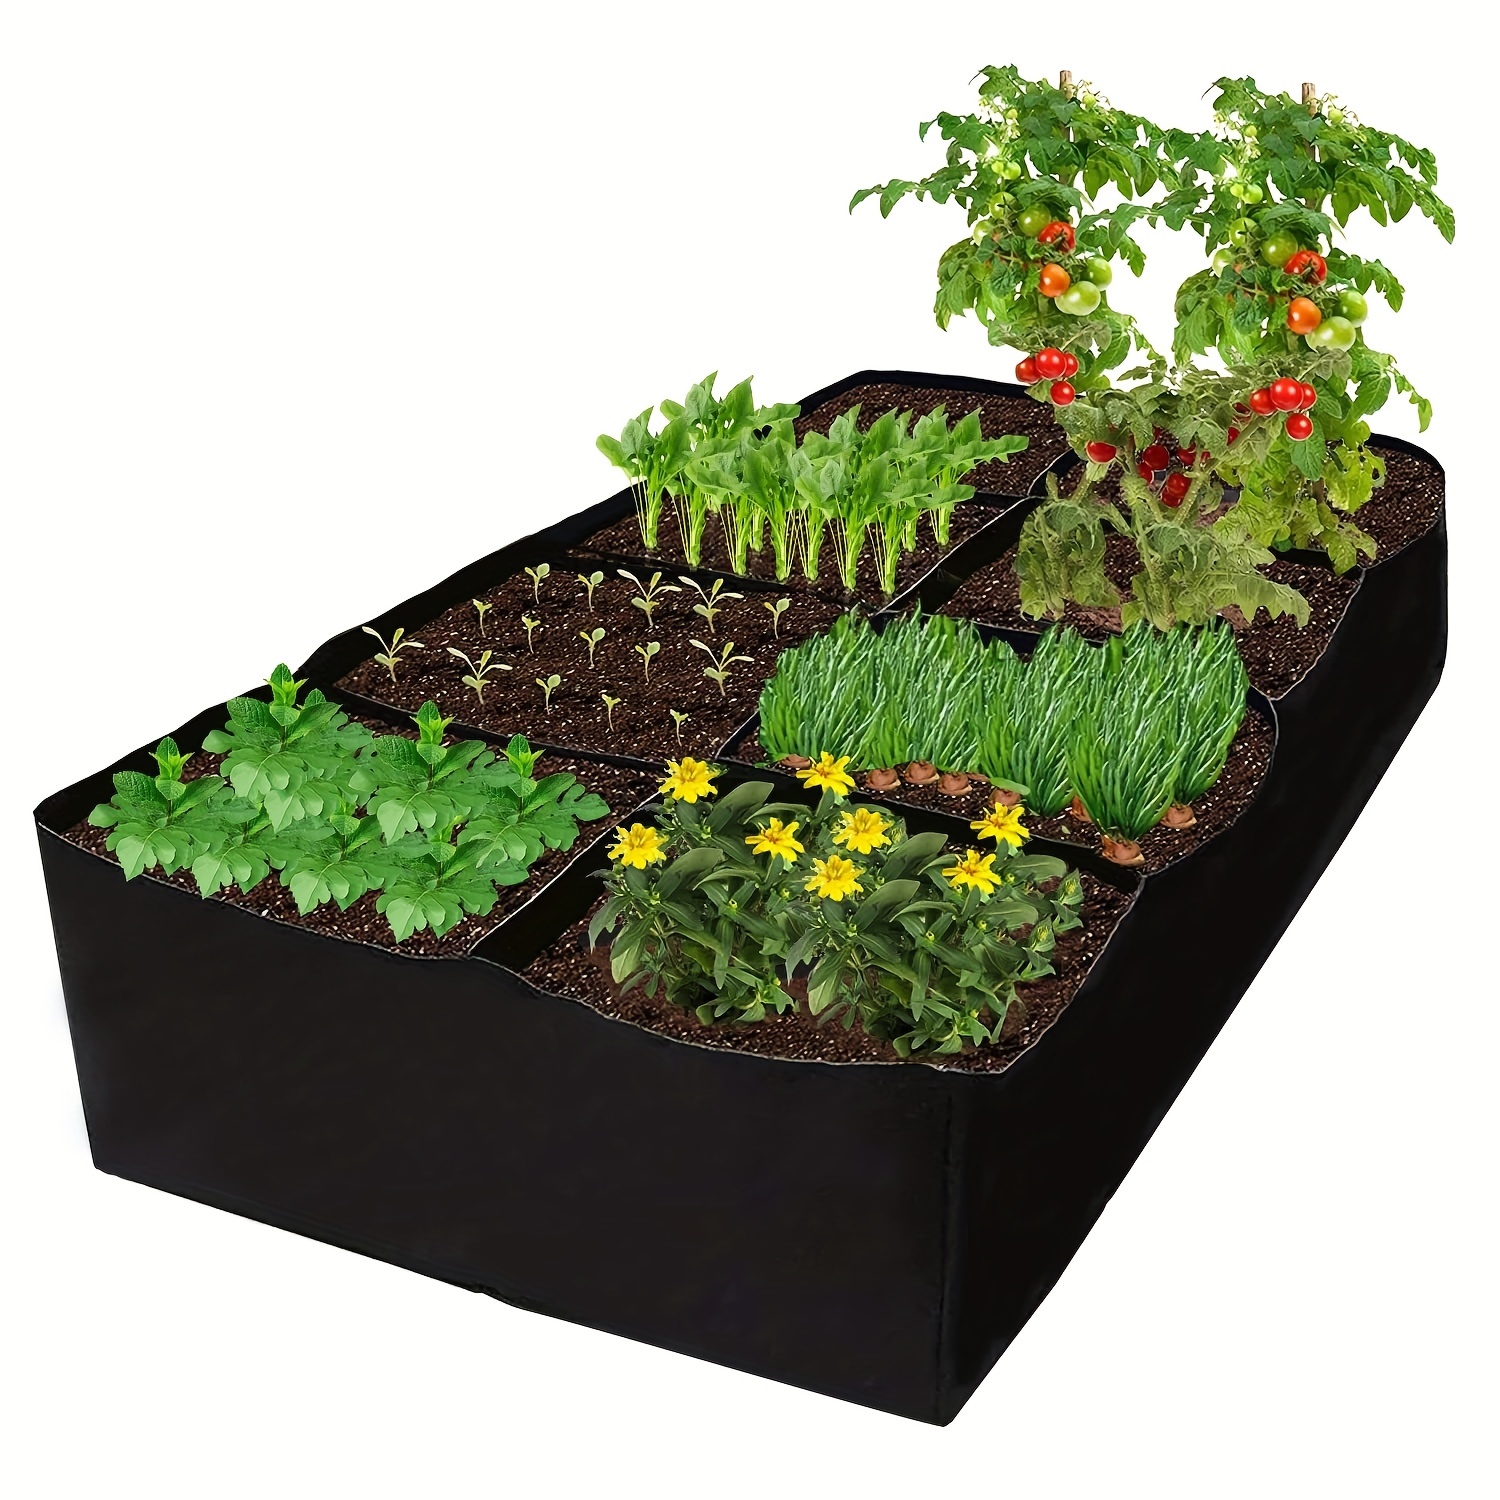 

1 Pack, Garden Bed, 128 Gallon 8 Grids Plant Grow Bags, 3x6ft Breathable Planter Raised Beds For Growing Vegetables Potatoes Flowers, Rectangle Planting Container For Outdoor Indoor Gardening